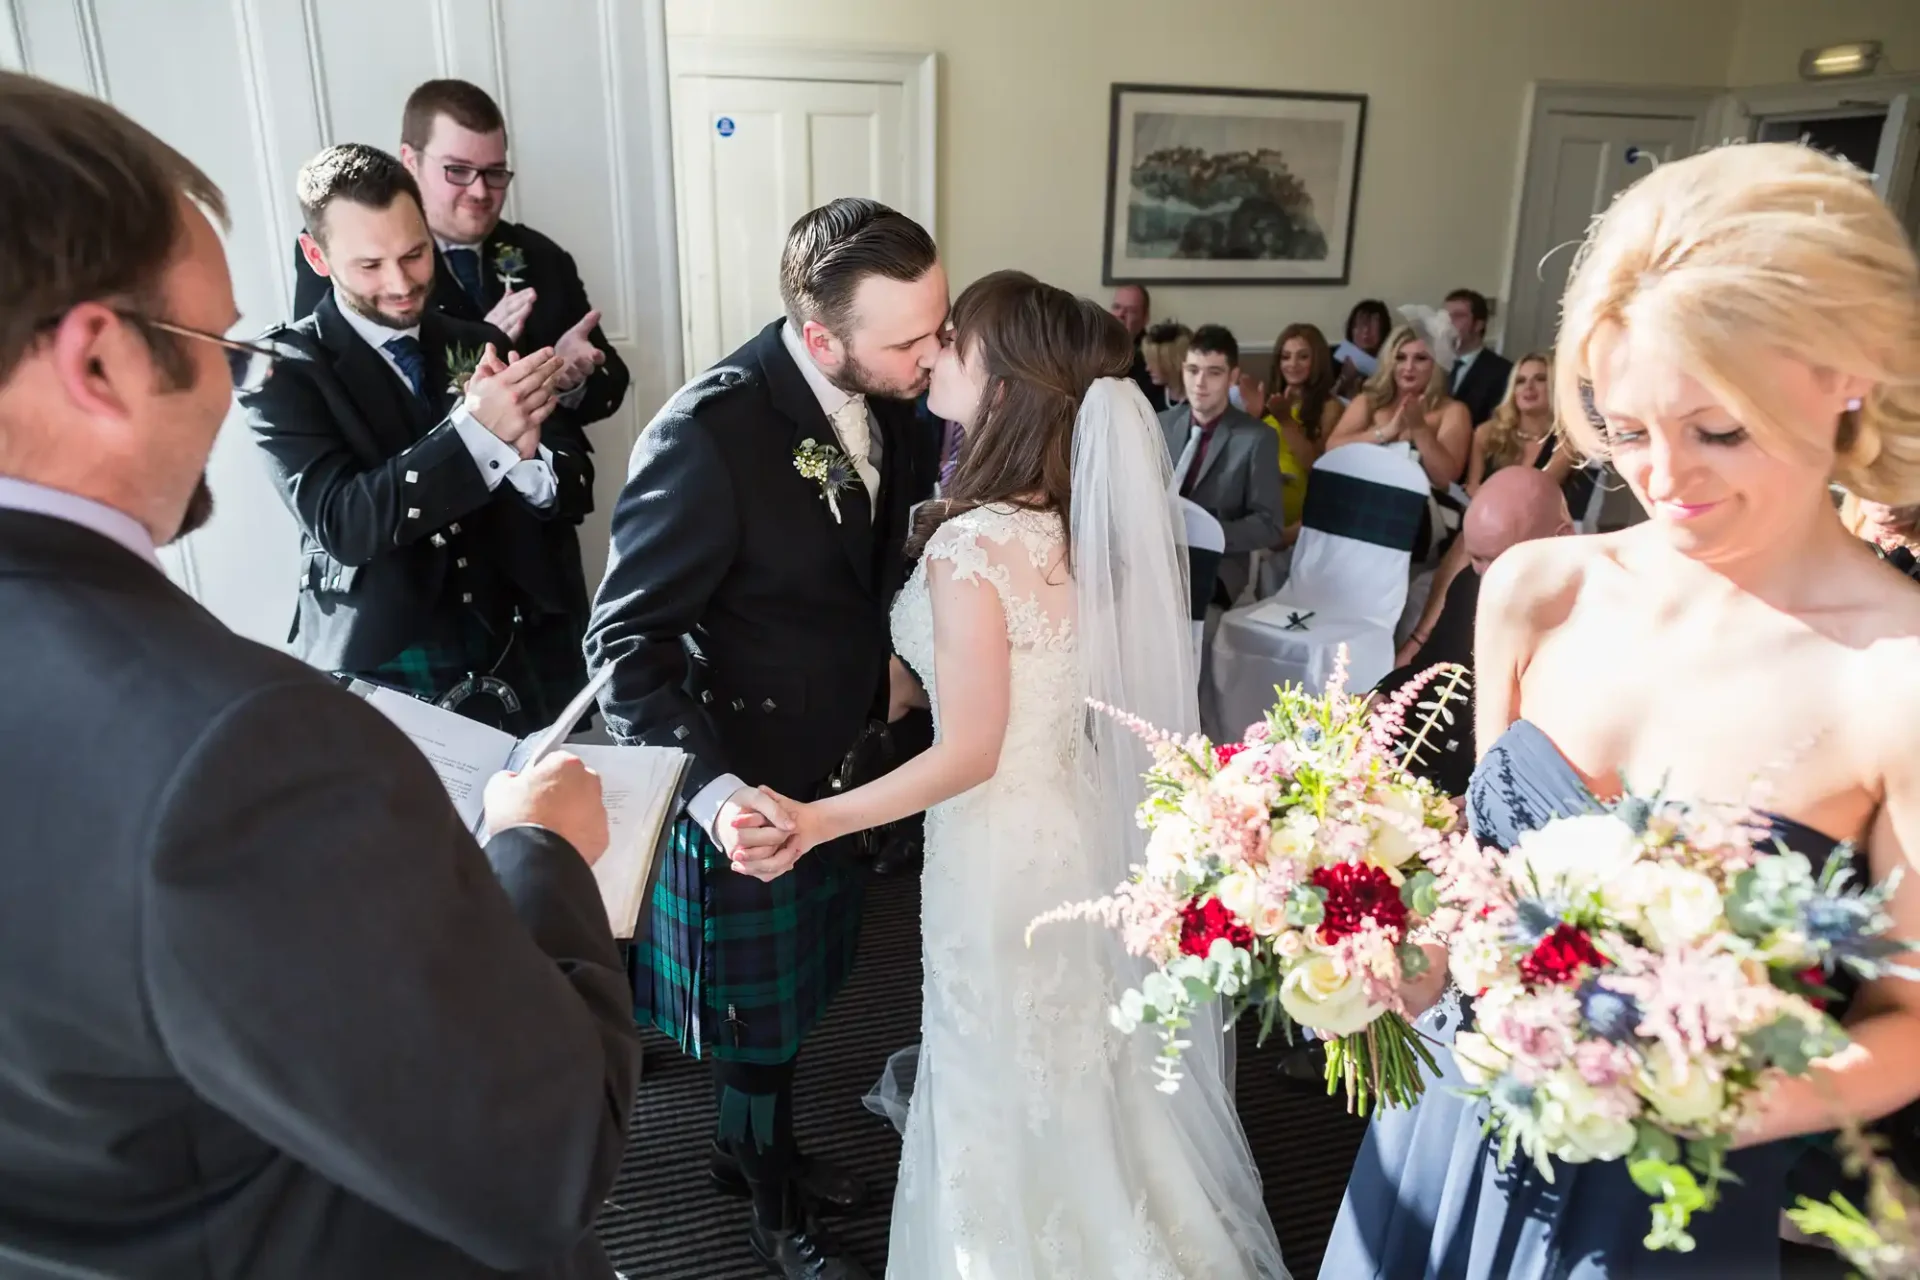 Bride and groom kissing at the altar, surrounded by guests, with a man in a kilt and a woman holding a floral bouquet visible.